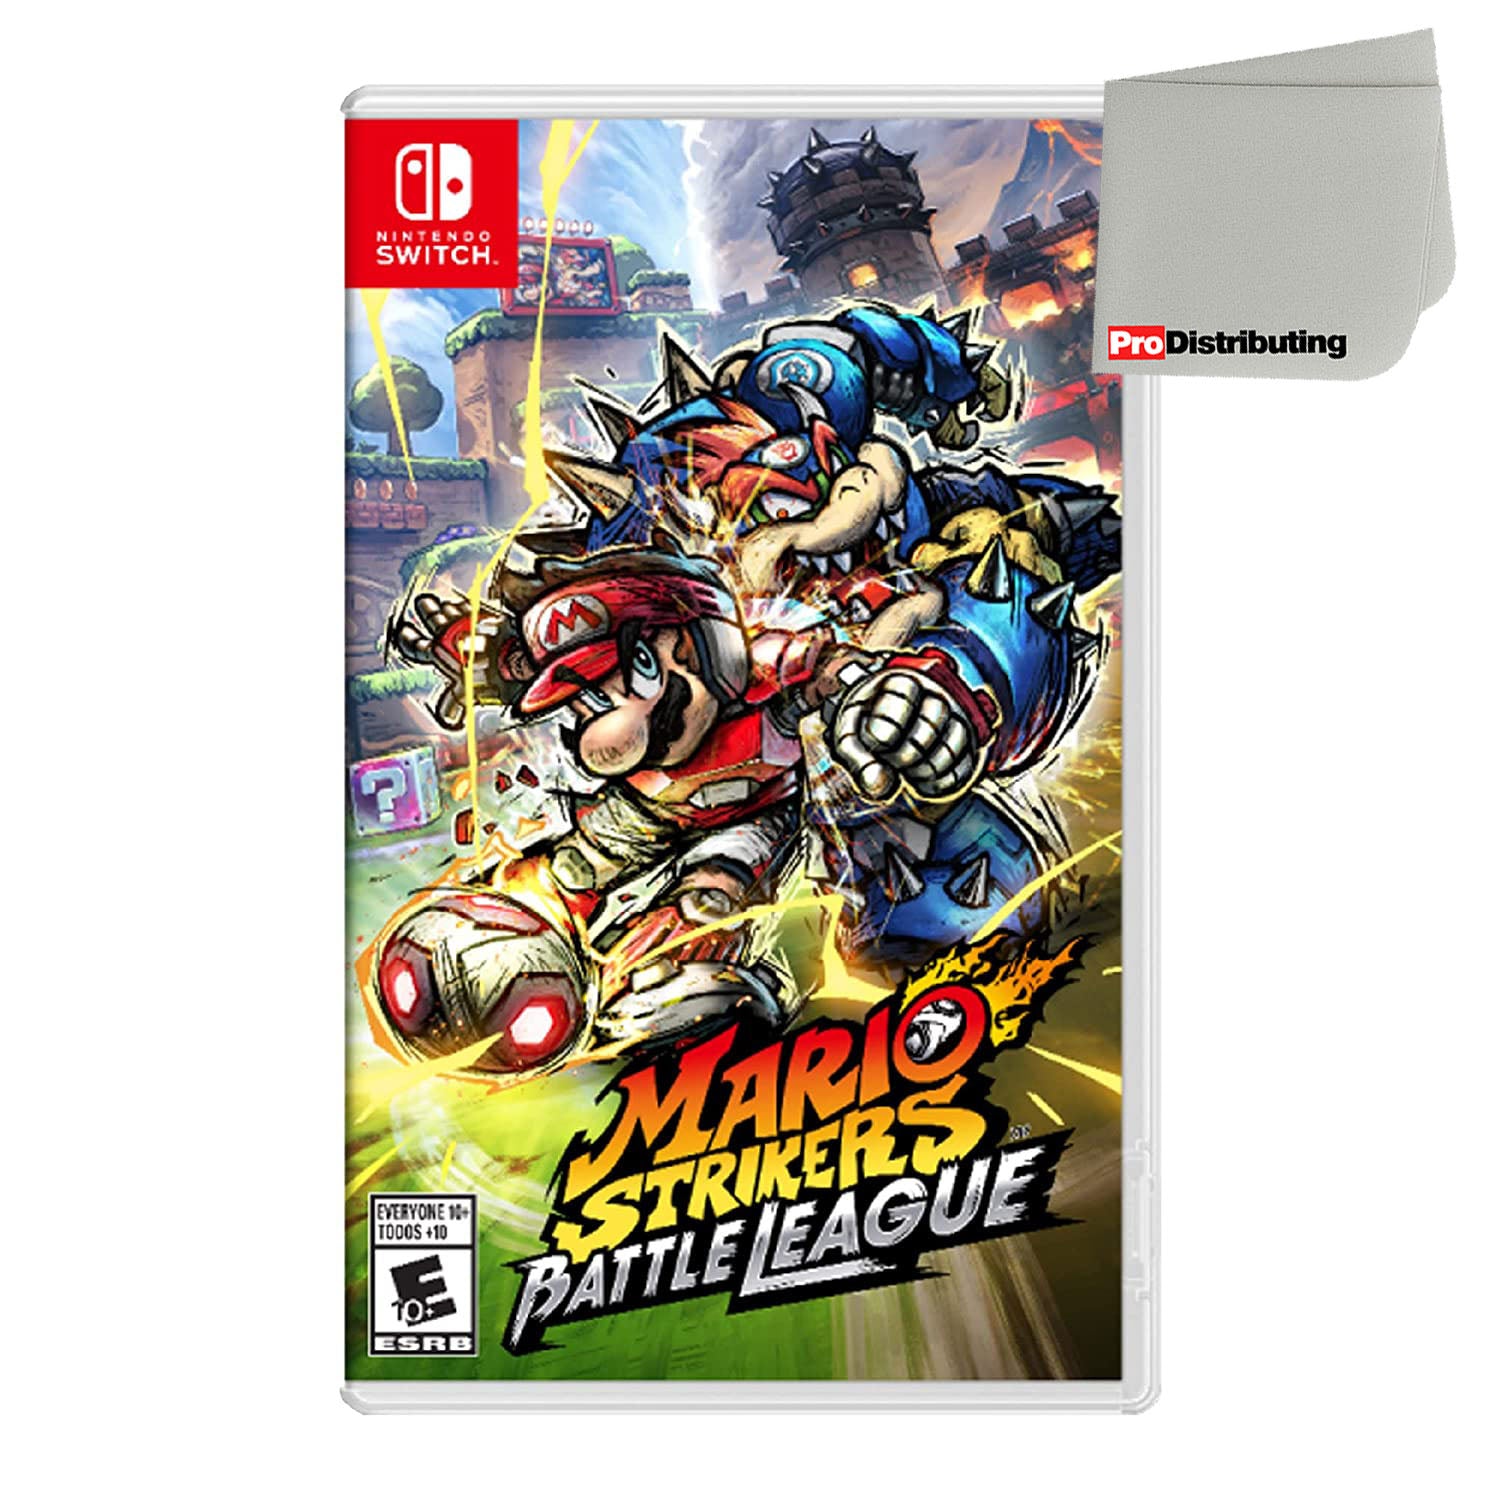 Mario Strikers: Battle League - Nintendo Switch with Microfiber Screen Cleaning Cloth - Pro-Distributing